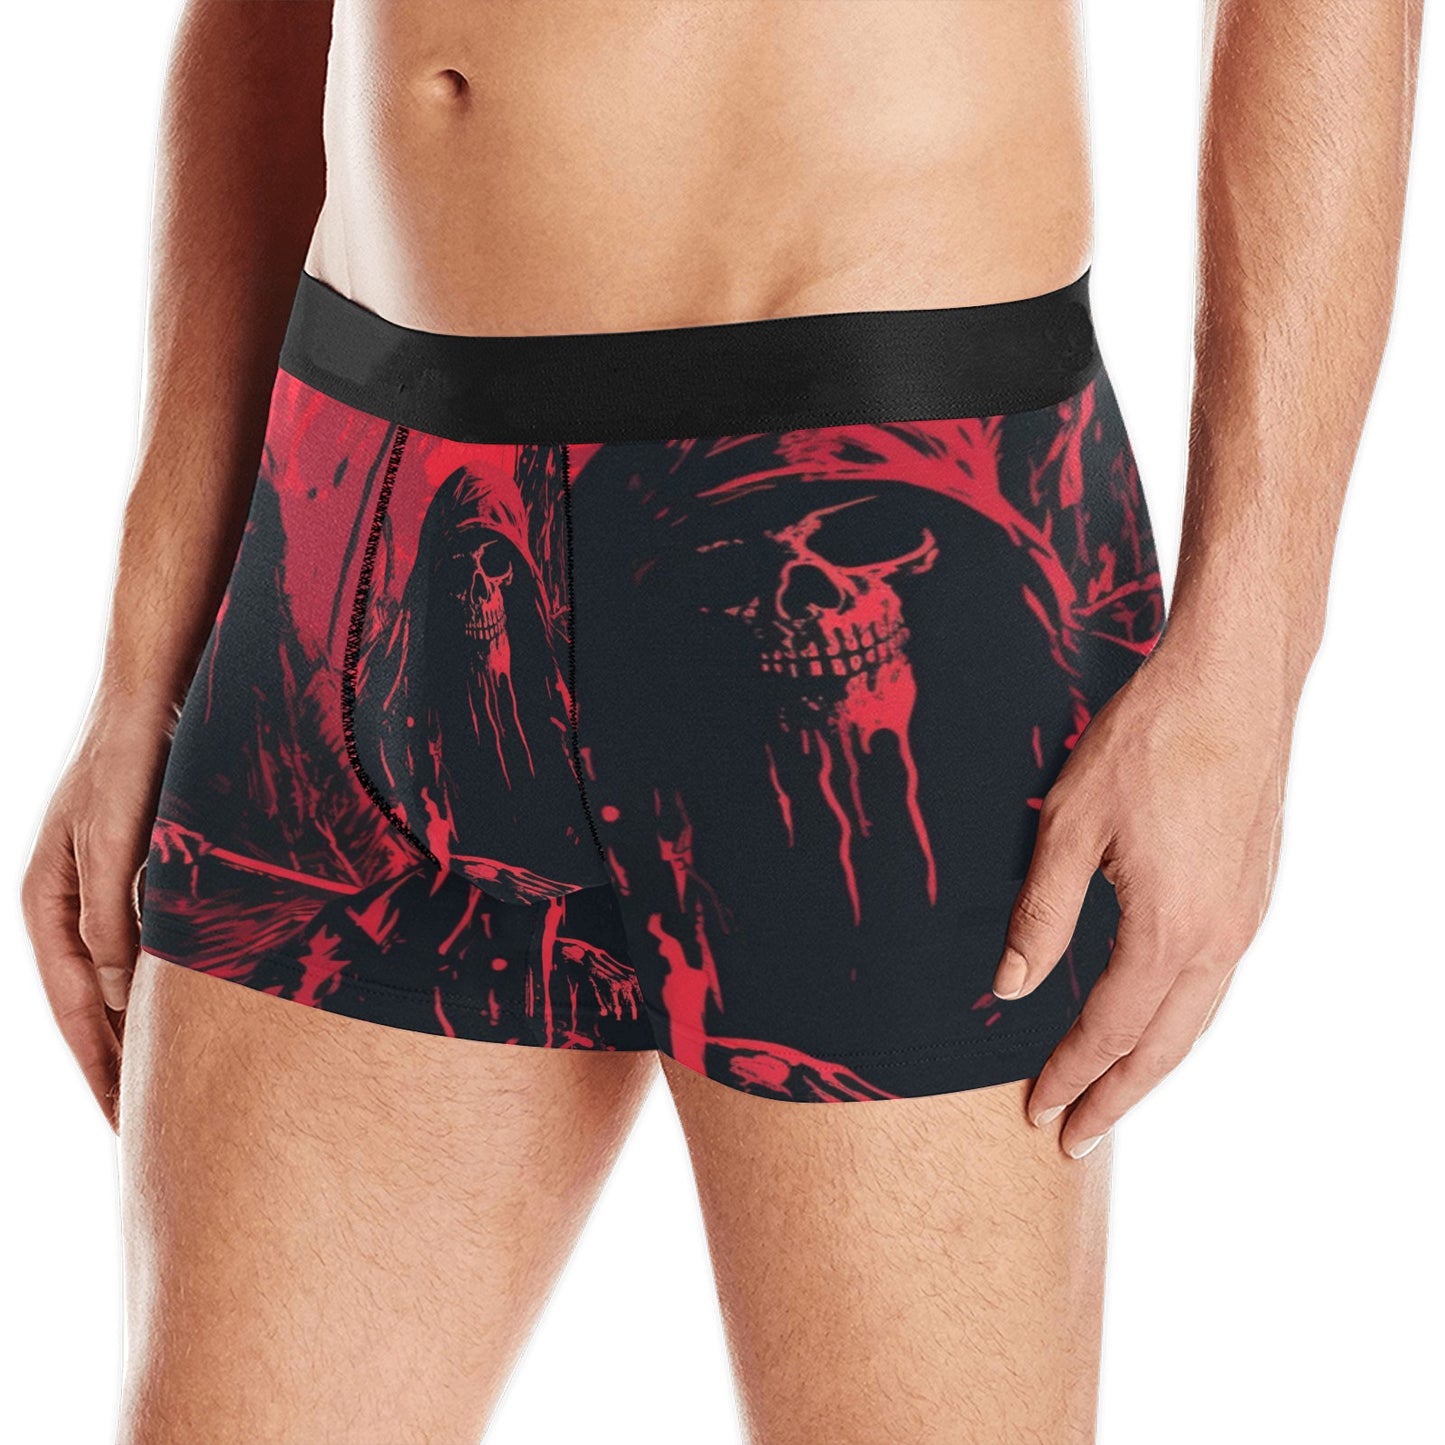 The Grim Reapers Boxer Briefs